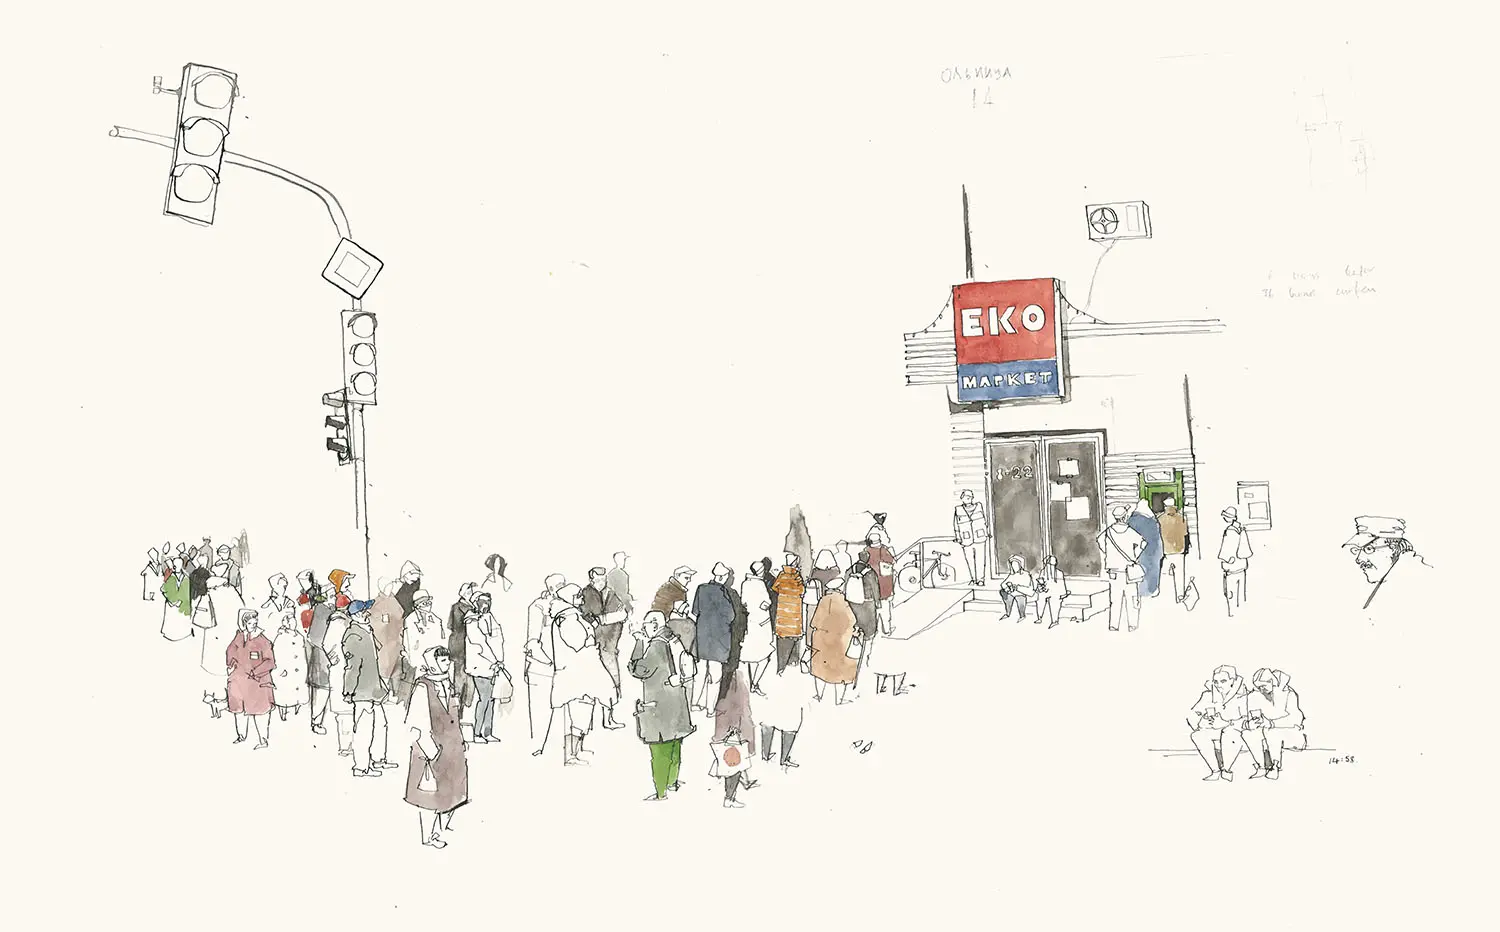 Illustration of a queue forms outside of an EKO market at a redlight.. The people in line wear winter coats and beils. 